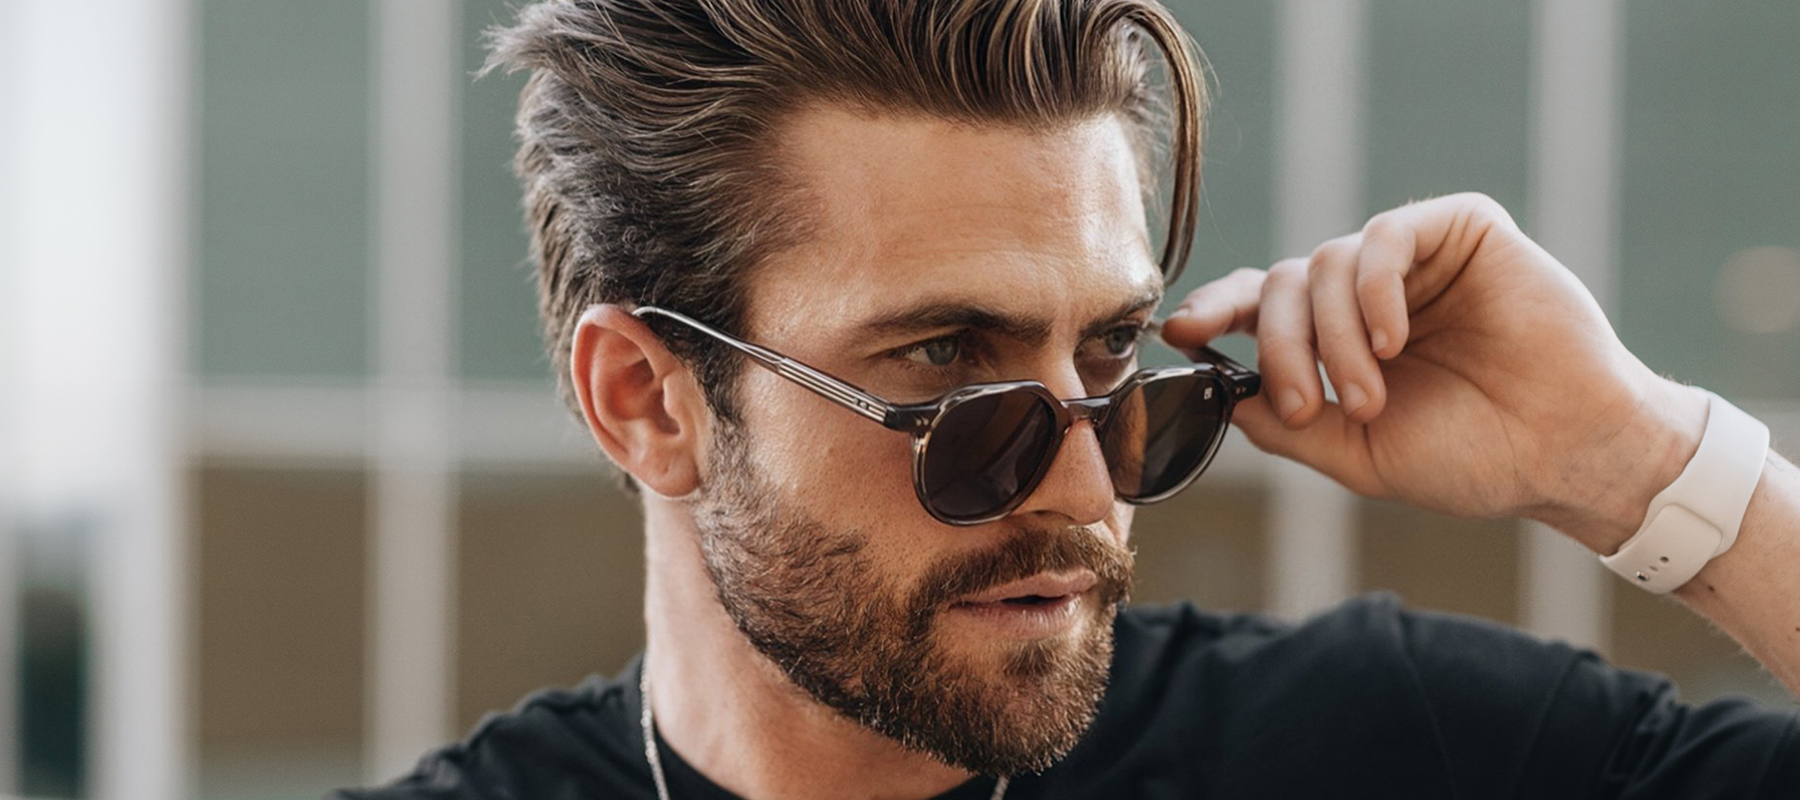 Top Trends: Most Popular Styles of Sunglasses for Men